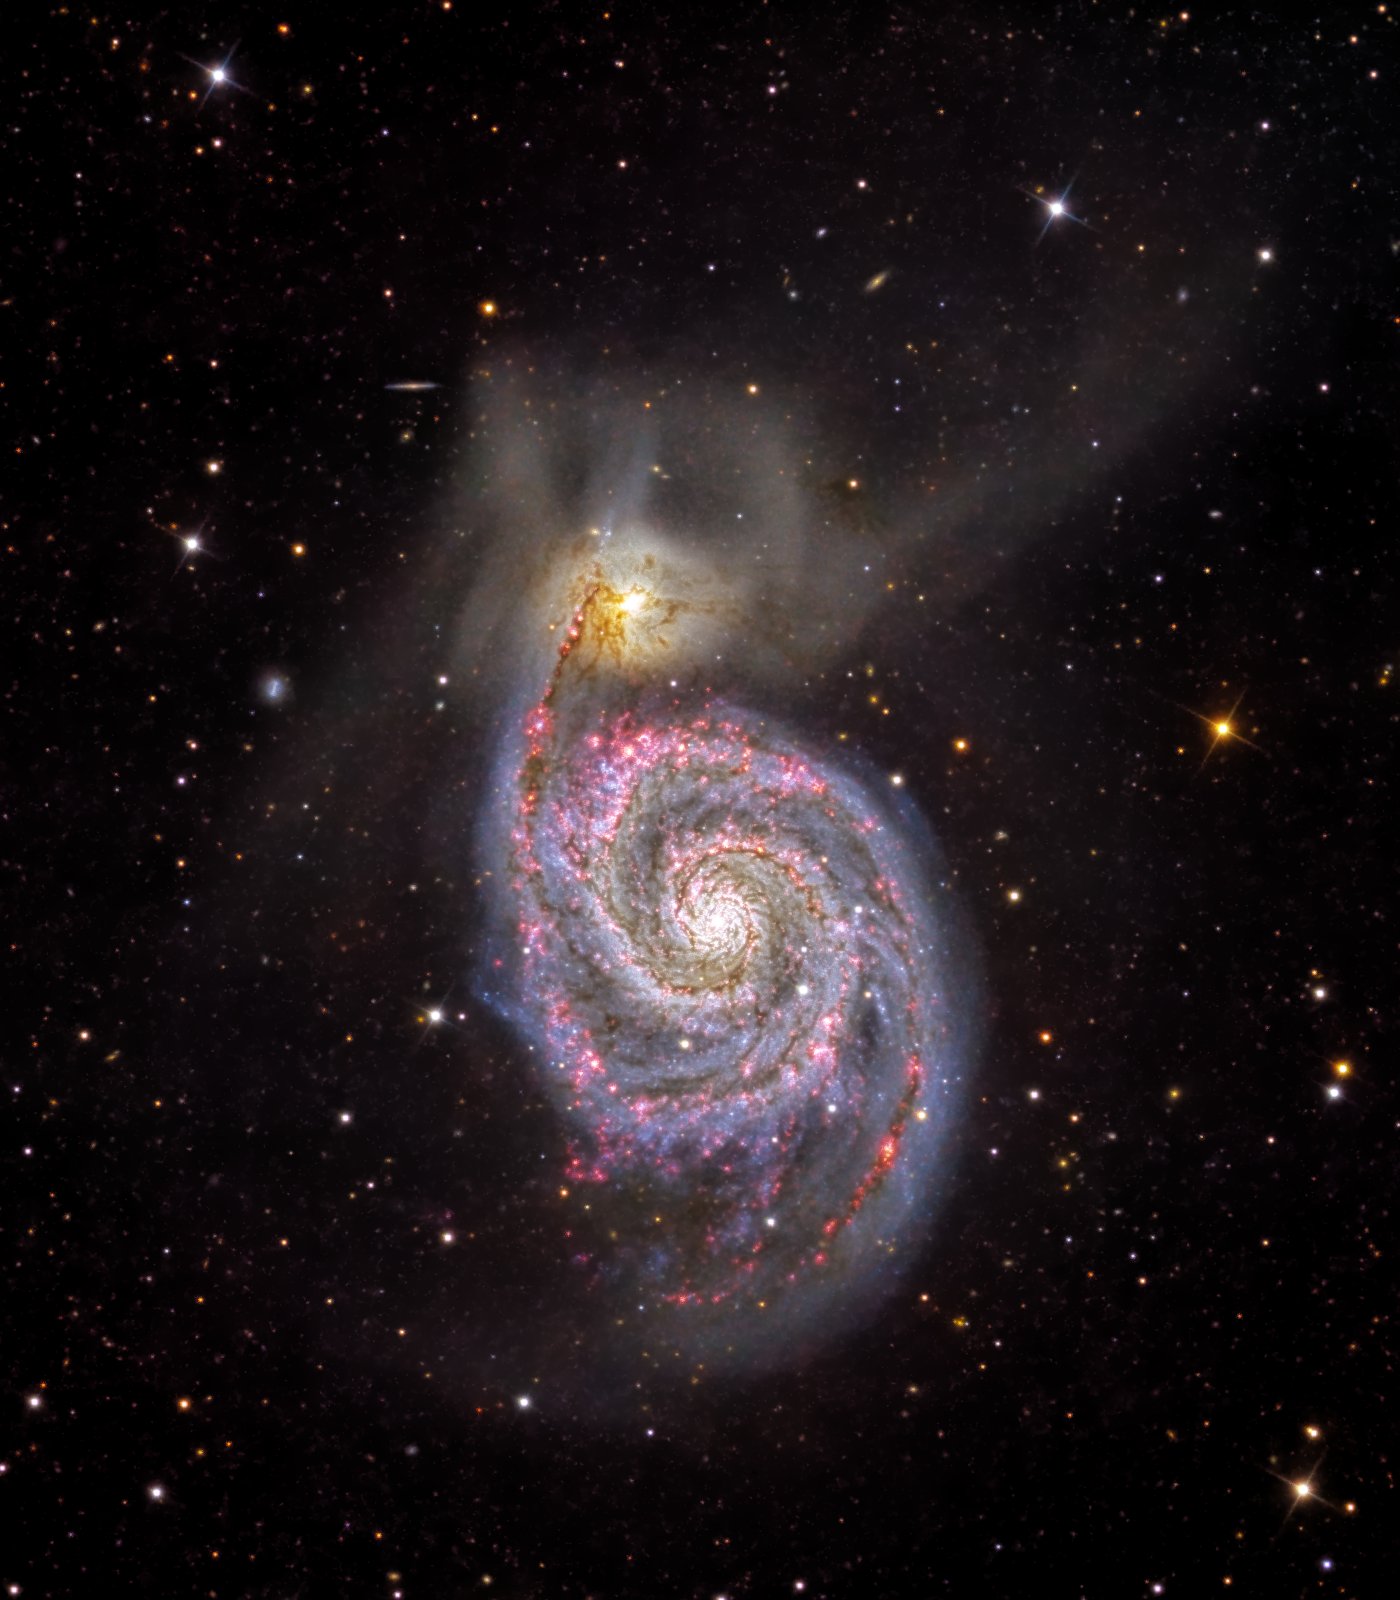 M51 (NGC 5194 and NGC 5195, Whirlpool Galaxy) in H-alpha and continuum light